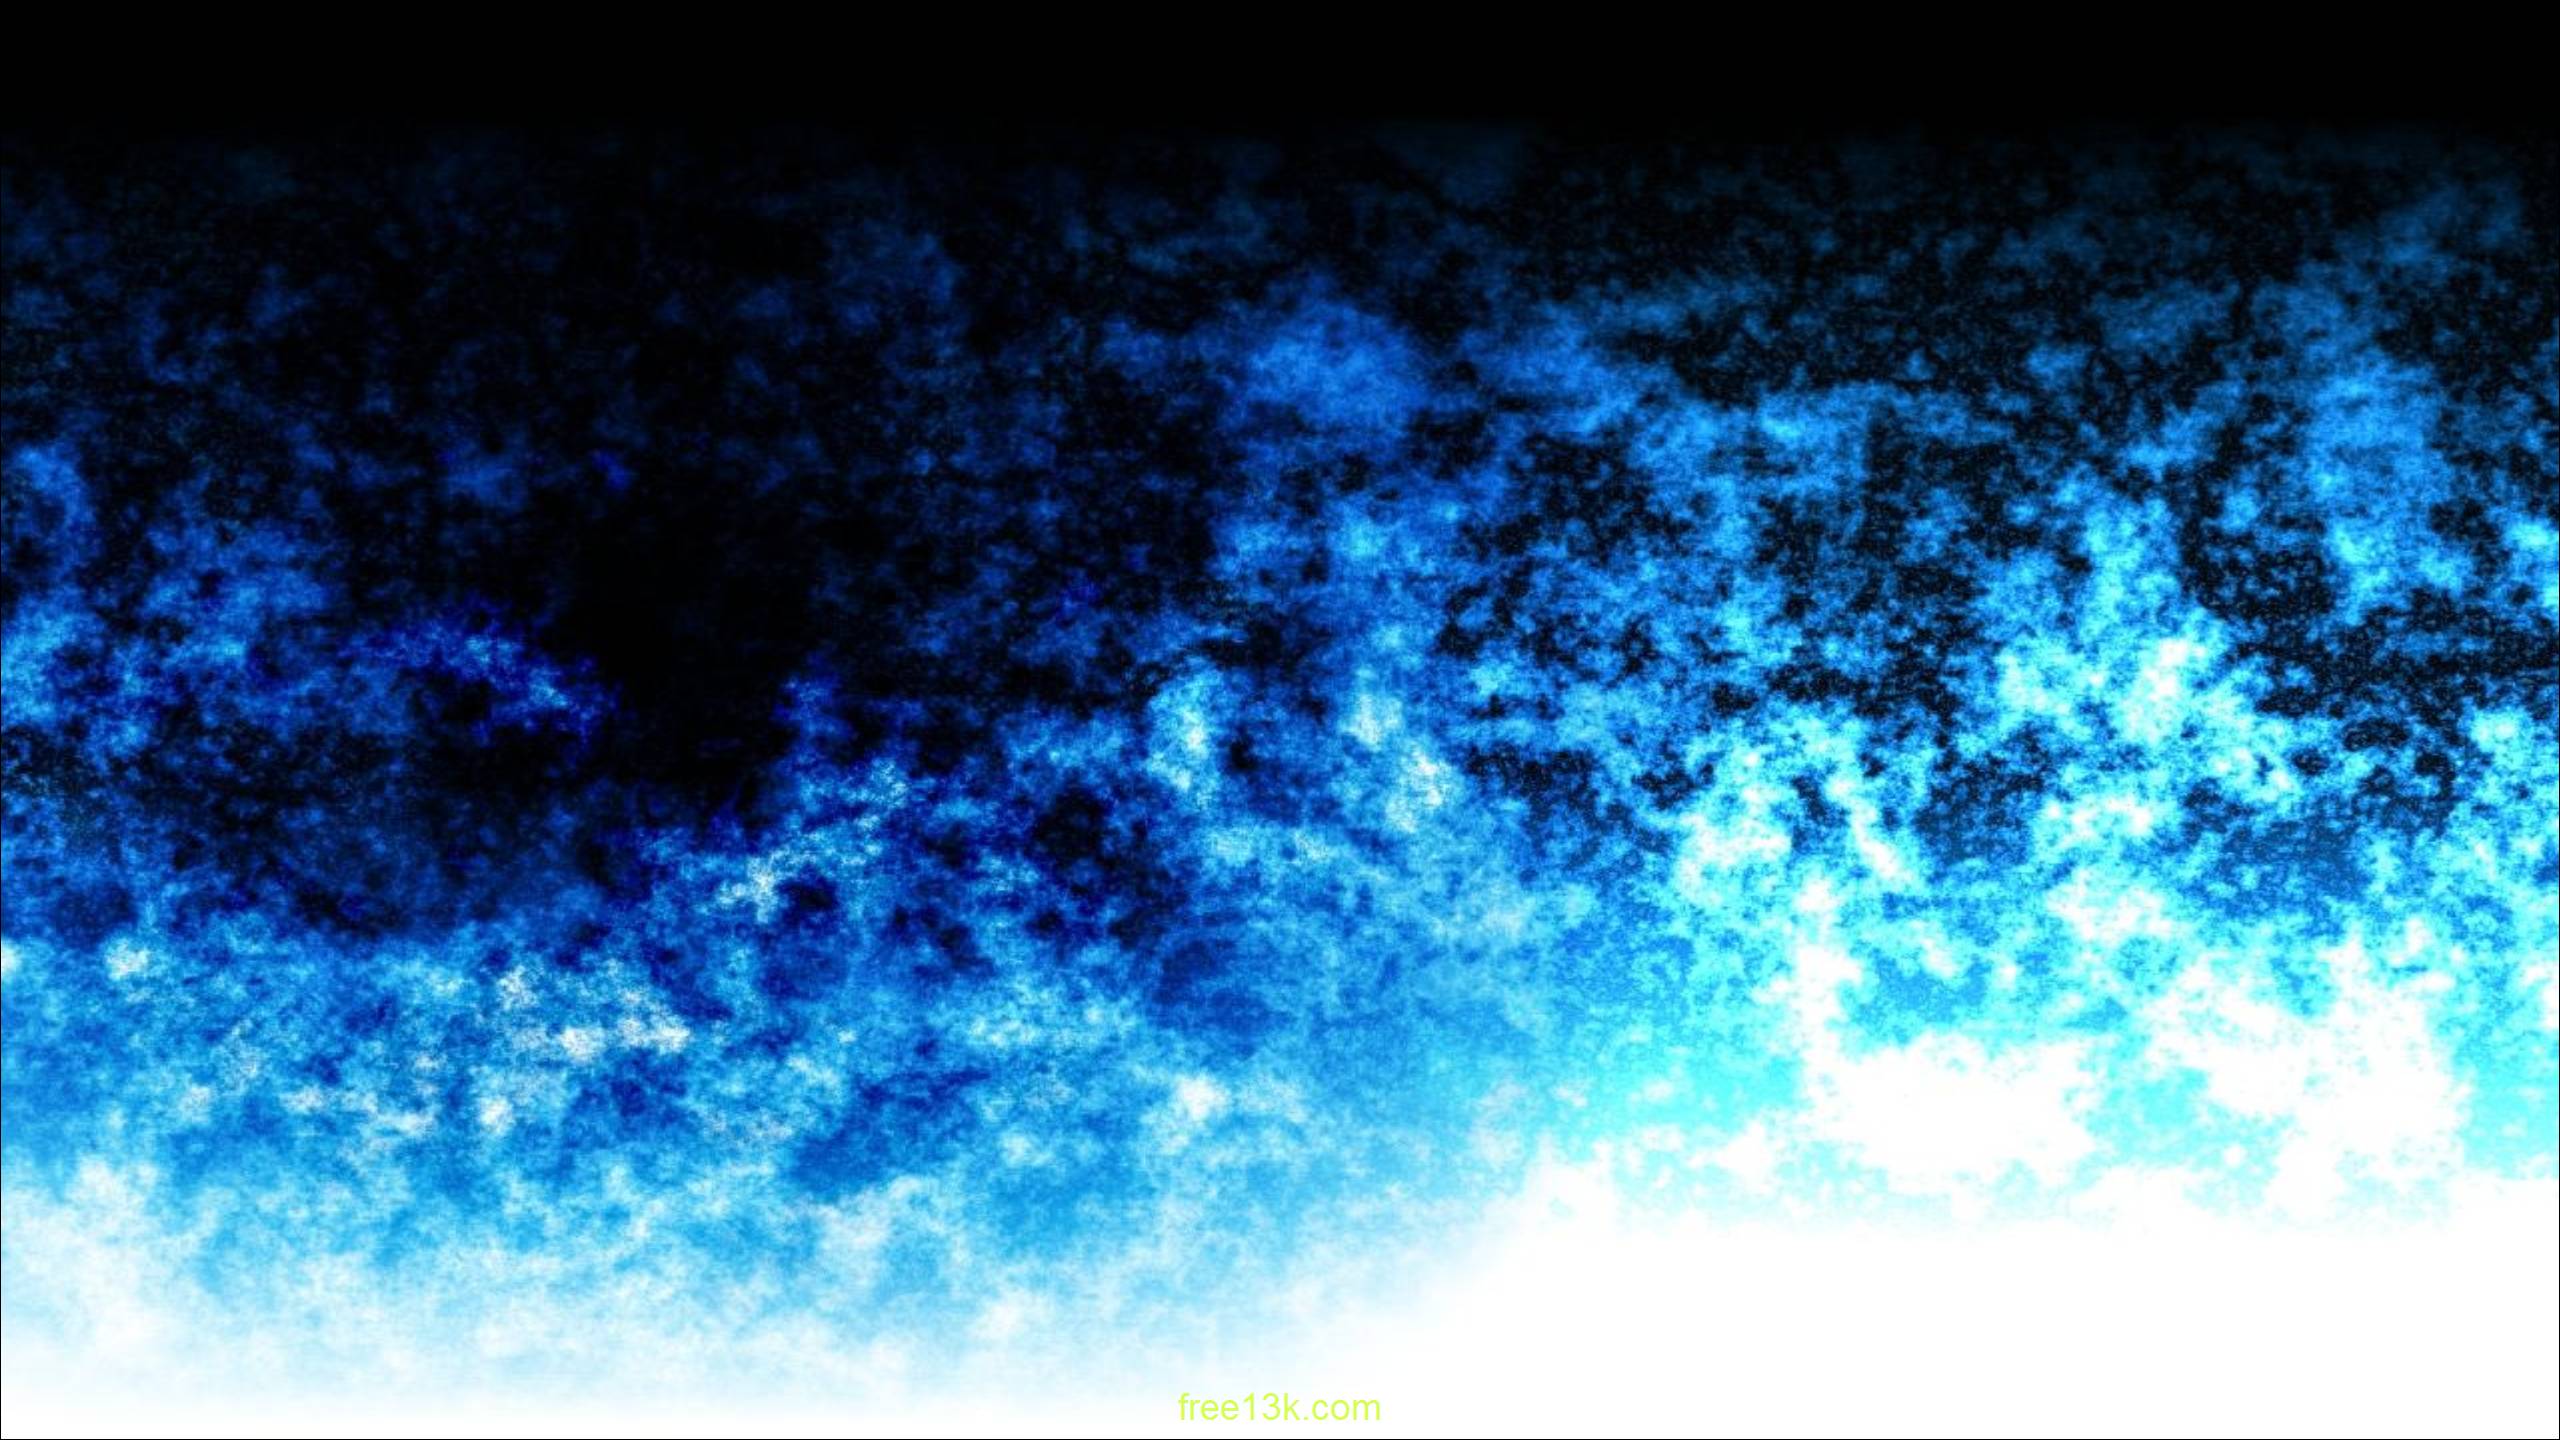 Free Download Download Cool Blue Abstract Frames Flames 2560x1440 Hd Wallpaper 2560x1440 For Your Desktop Mobile Tablet Explore 38 Cool Wallpapers 2560 X 1440 2560 X 1440 Desktop Wallpaper 2560 X 1440 Phone Wallpaper 2560 X 1440 Tumblr